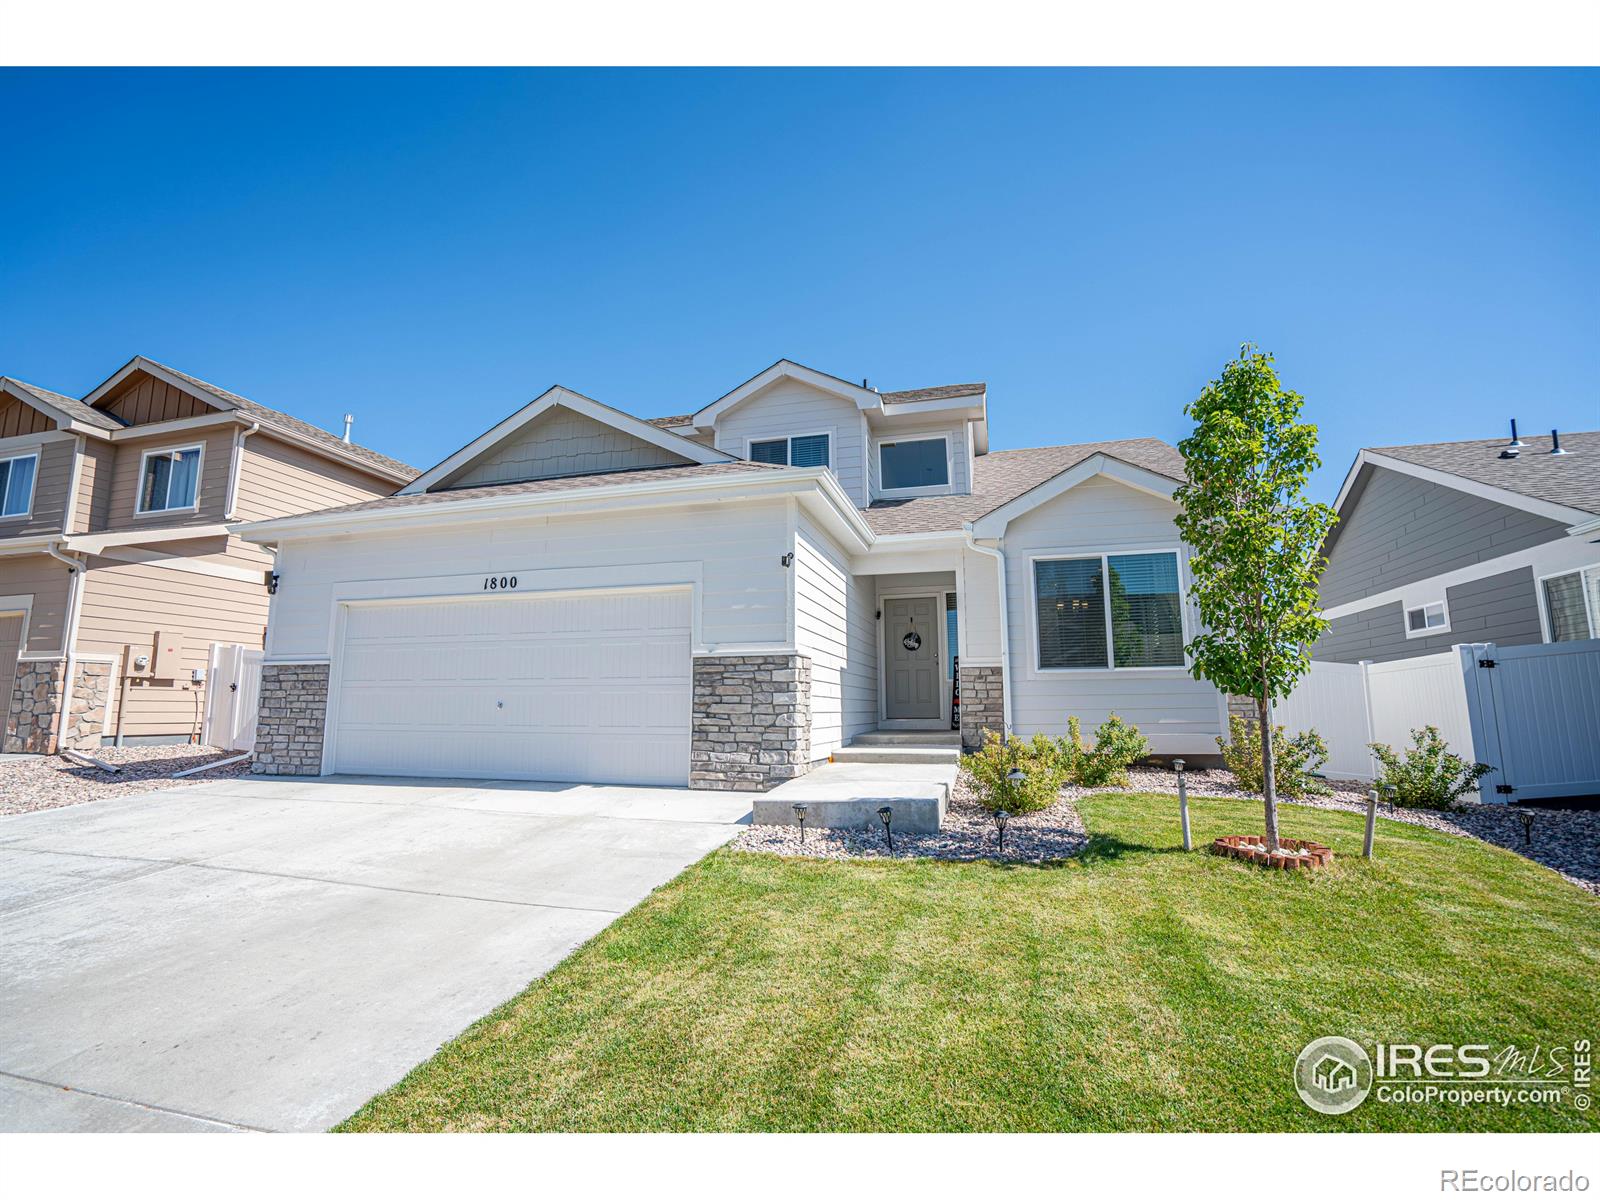 1800  101st Ave Ct, greeley MLS: 4567891000686 Beds: 4 Baths: 3 Price: $462,000